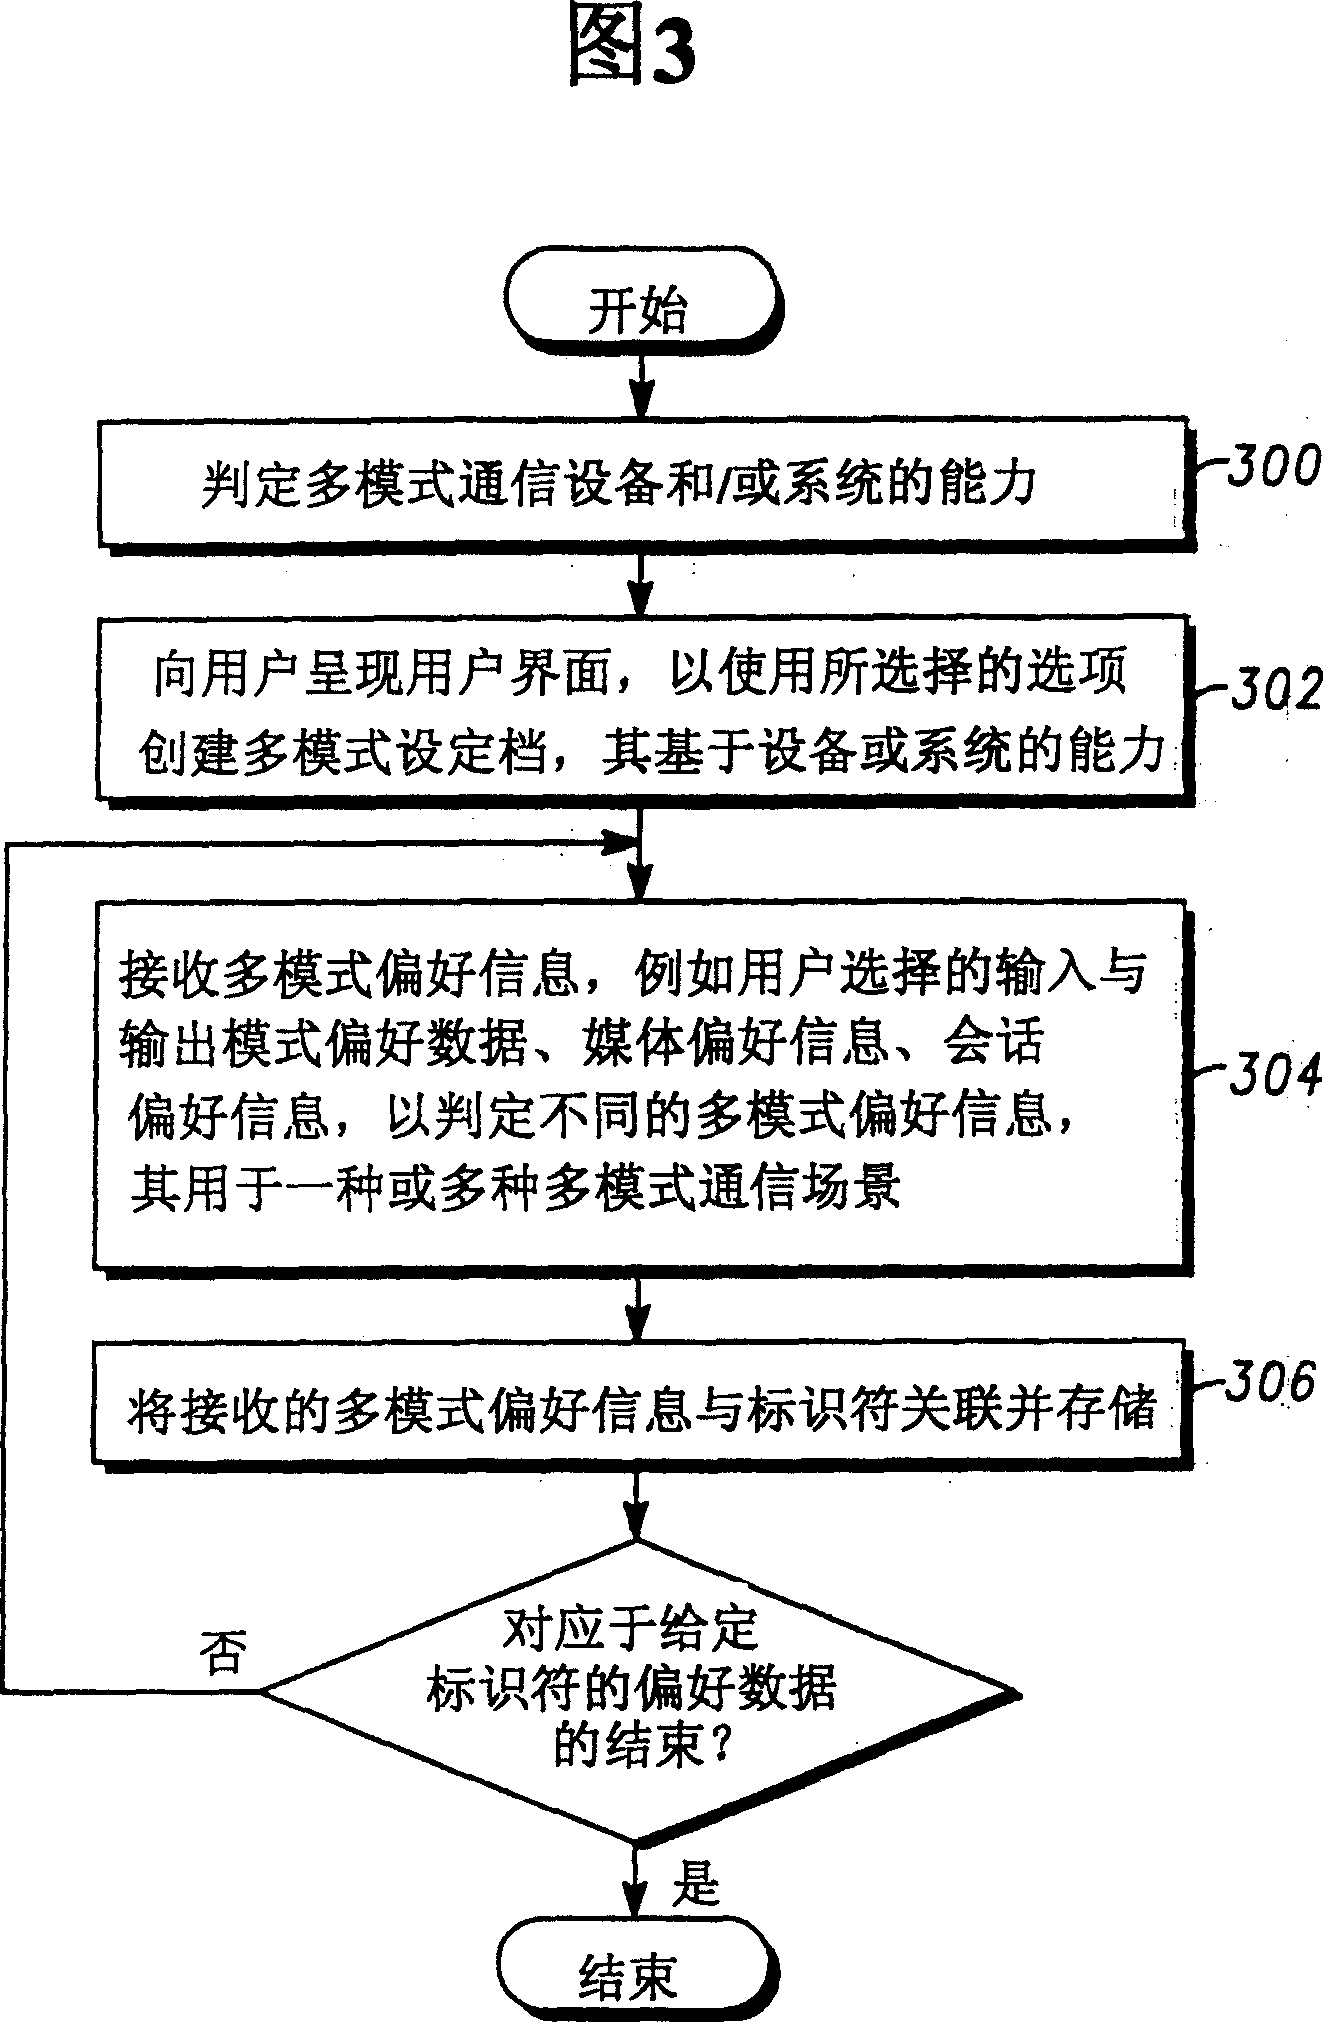 Multimodal communication method and apparatus with multi-modal profile